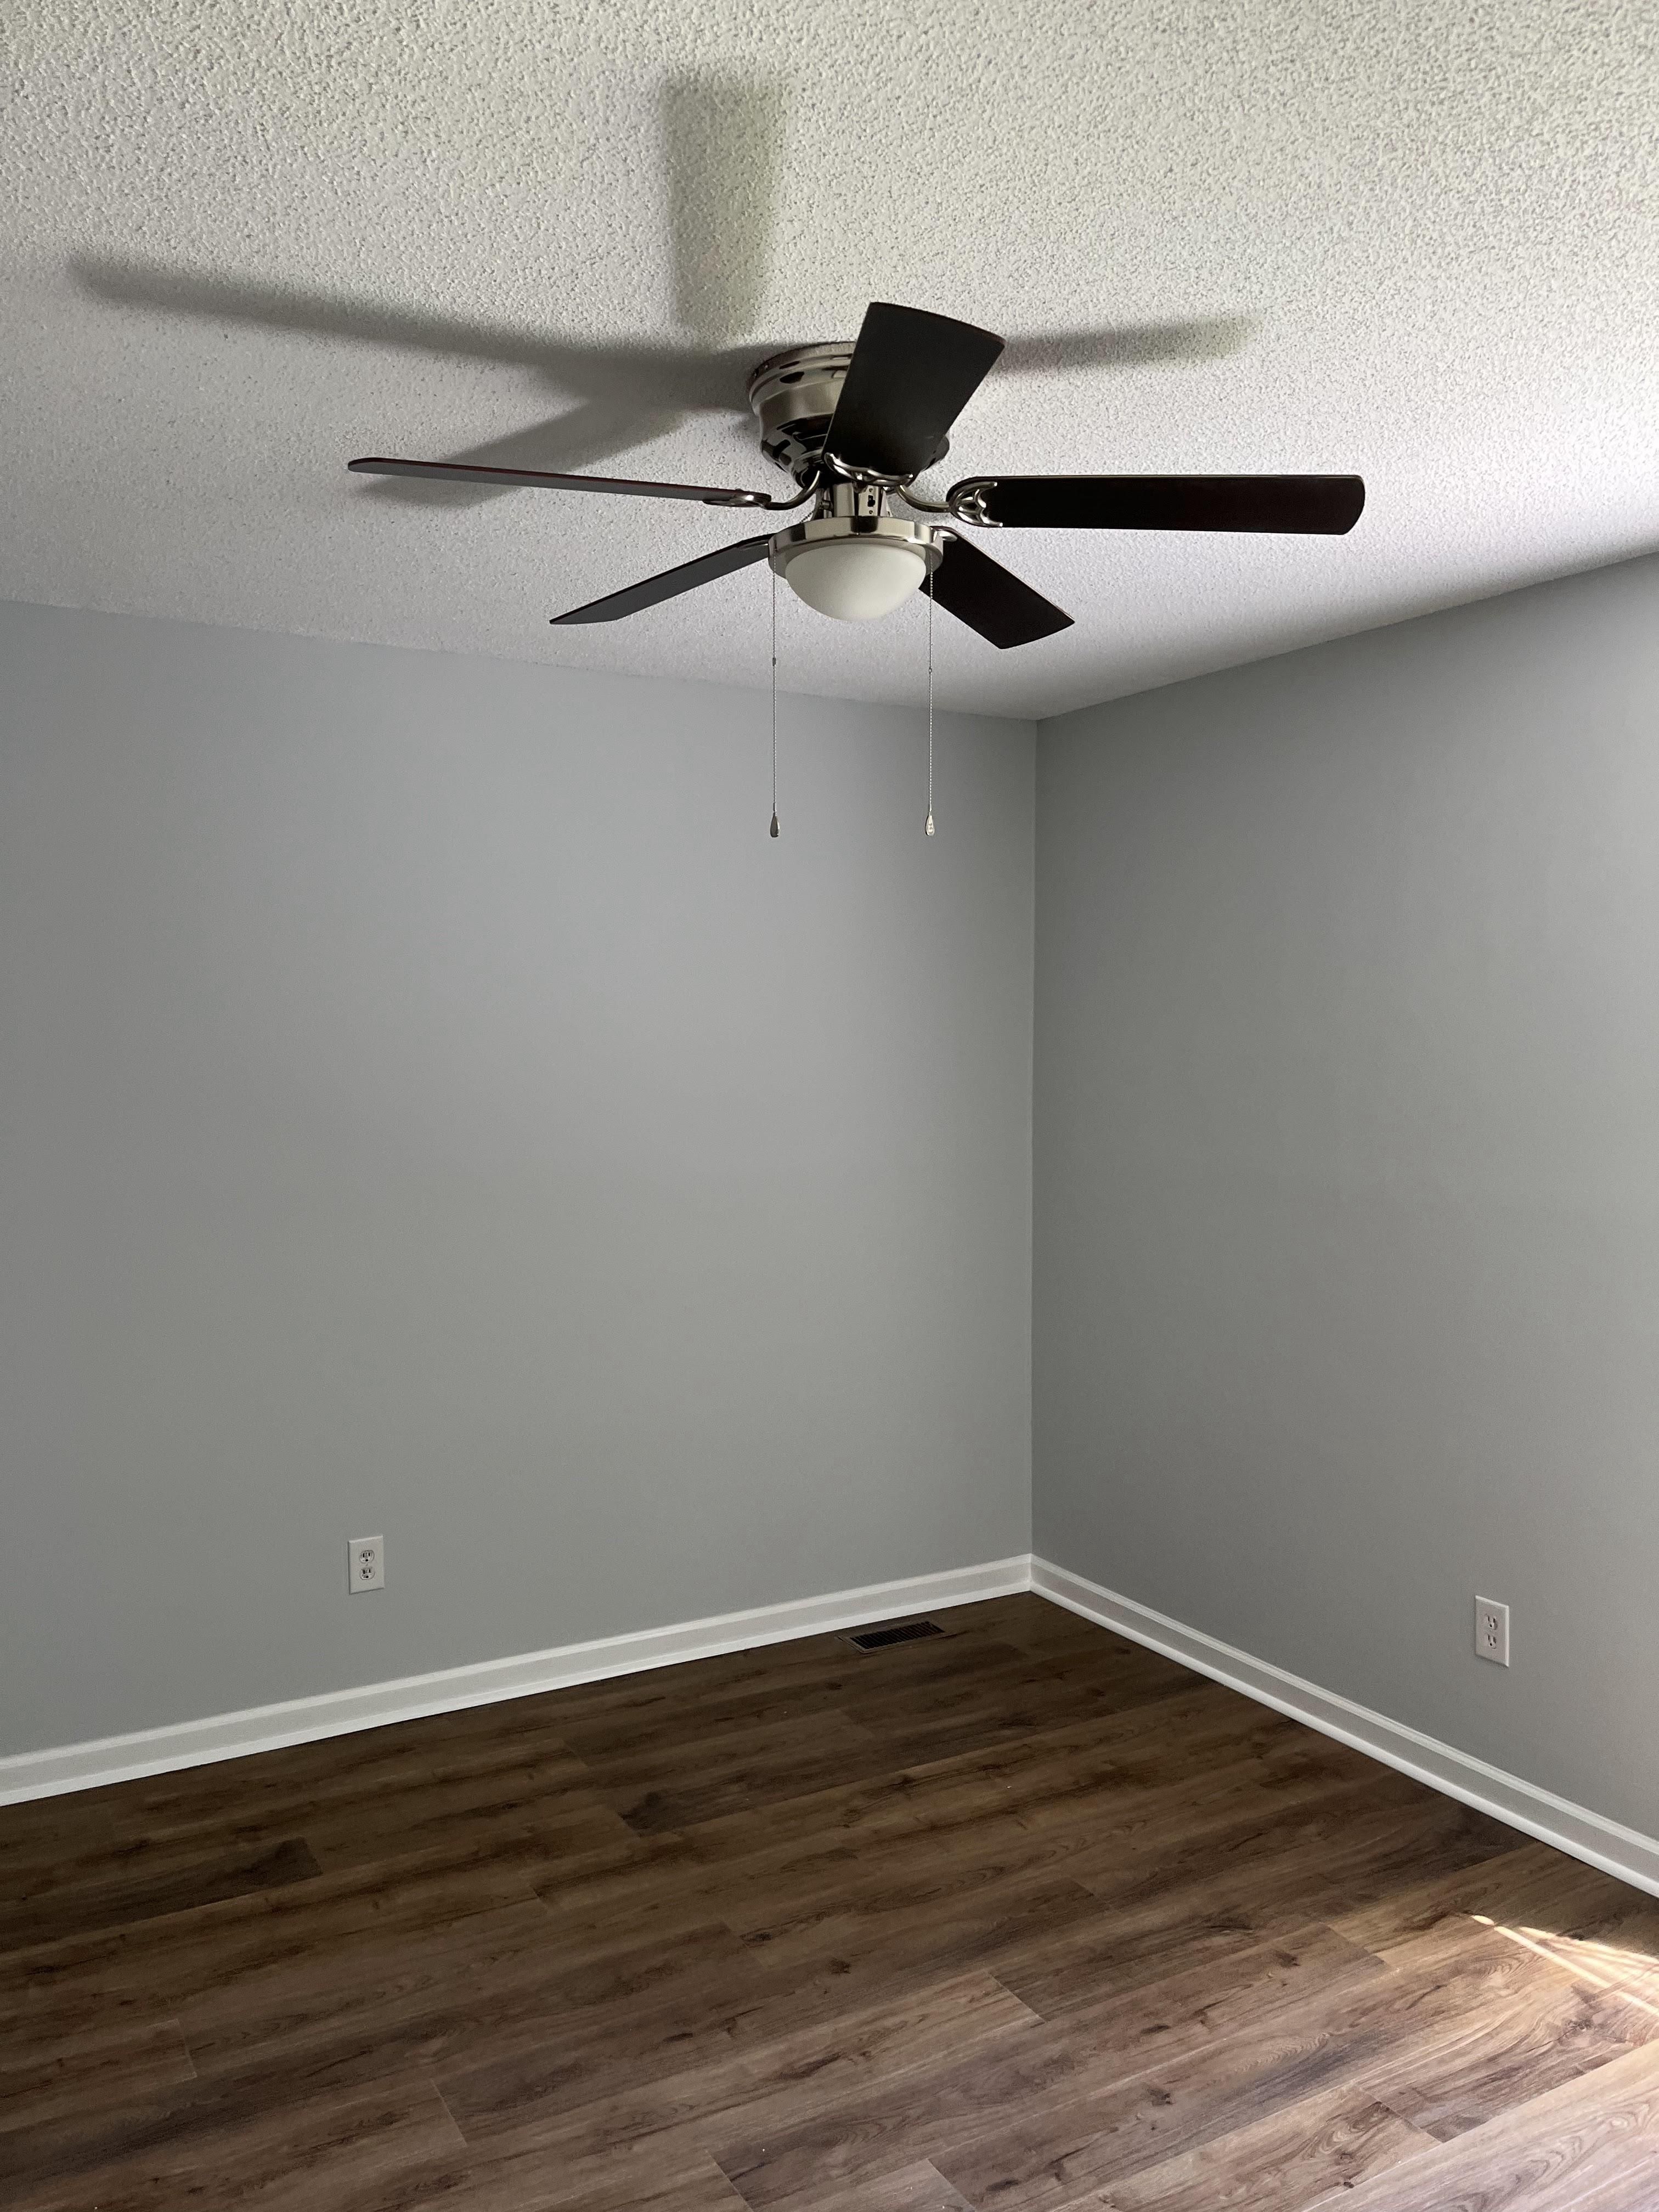 Interior Painting for Ain't Just Paint Divas in Fort Mill, South Carolina